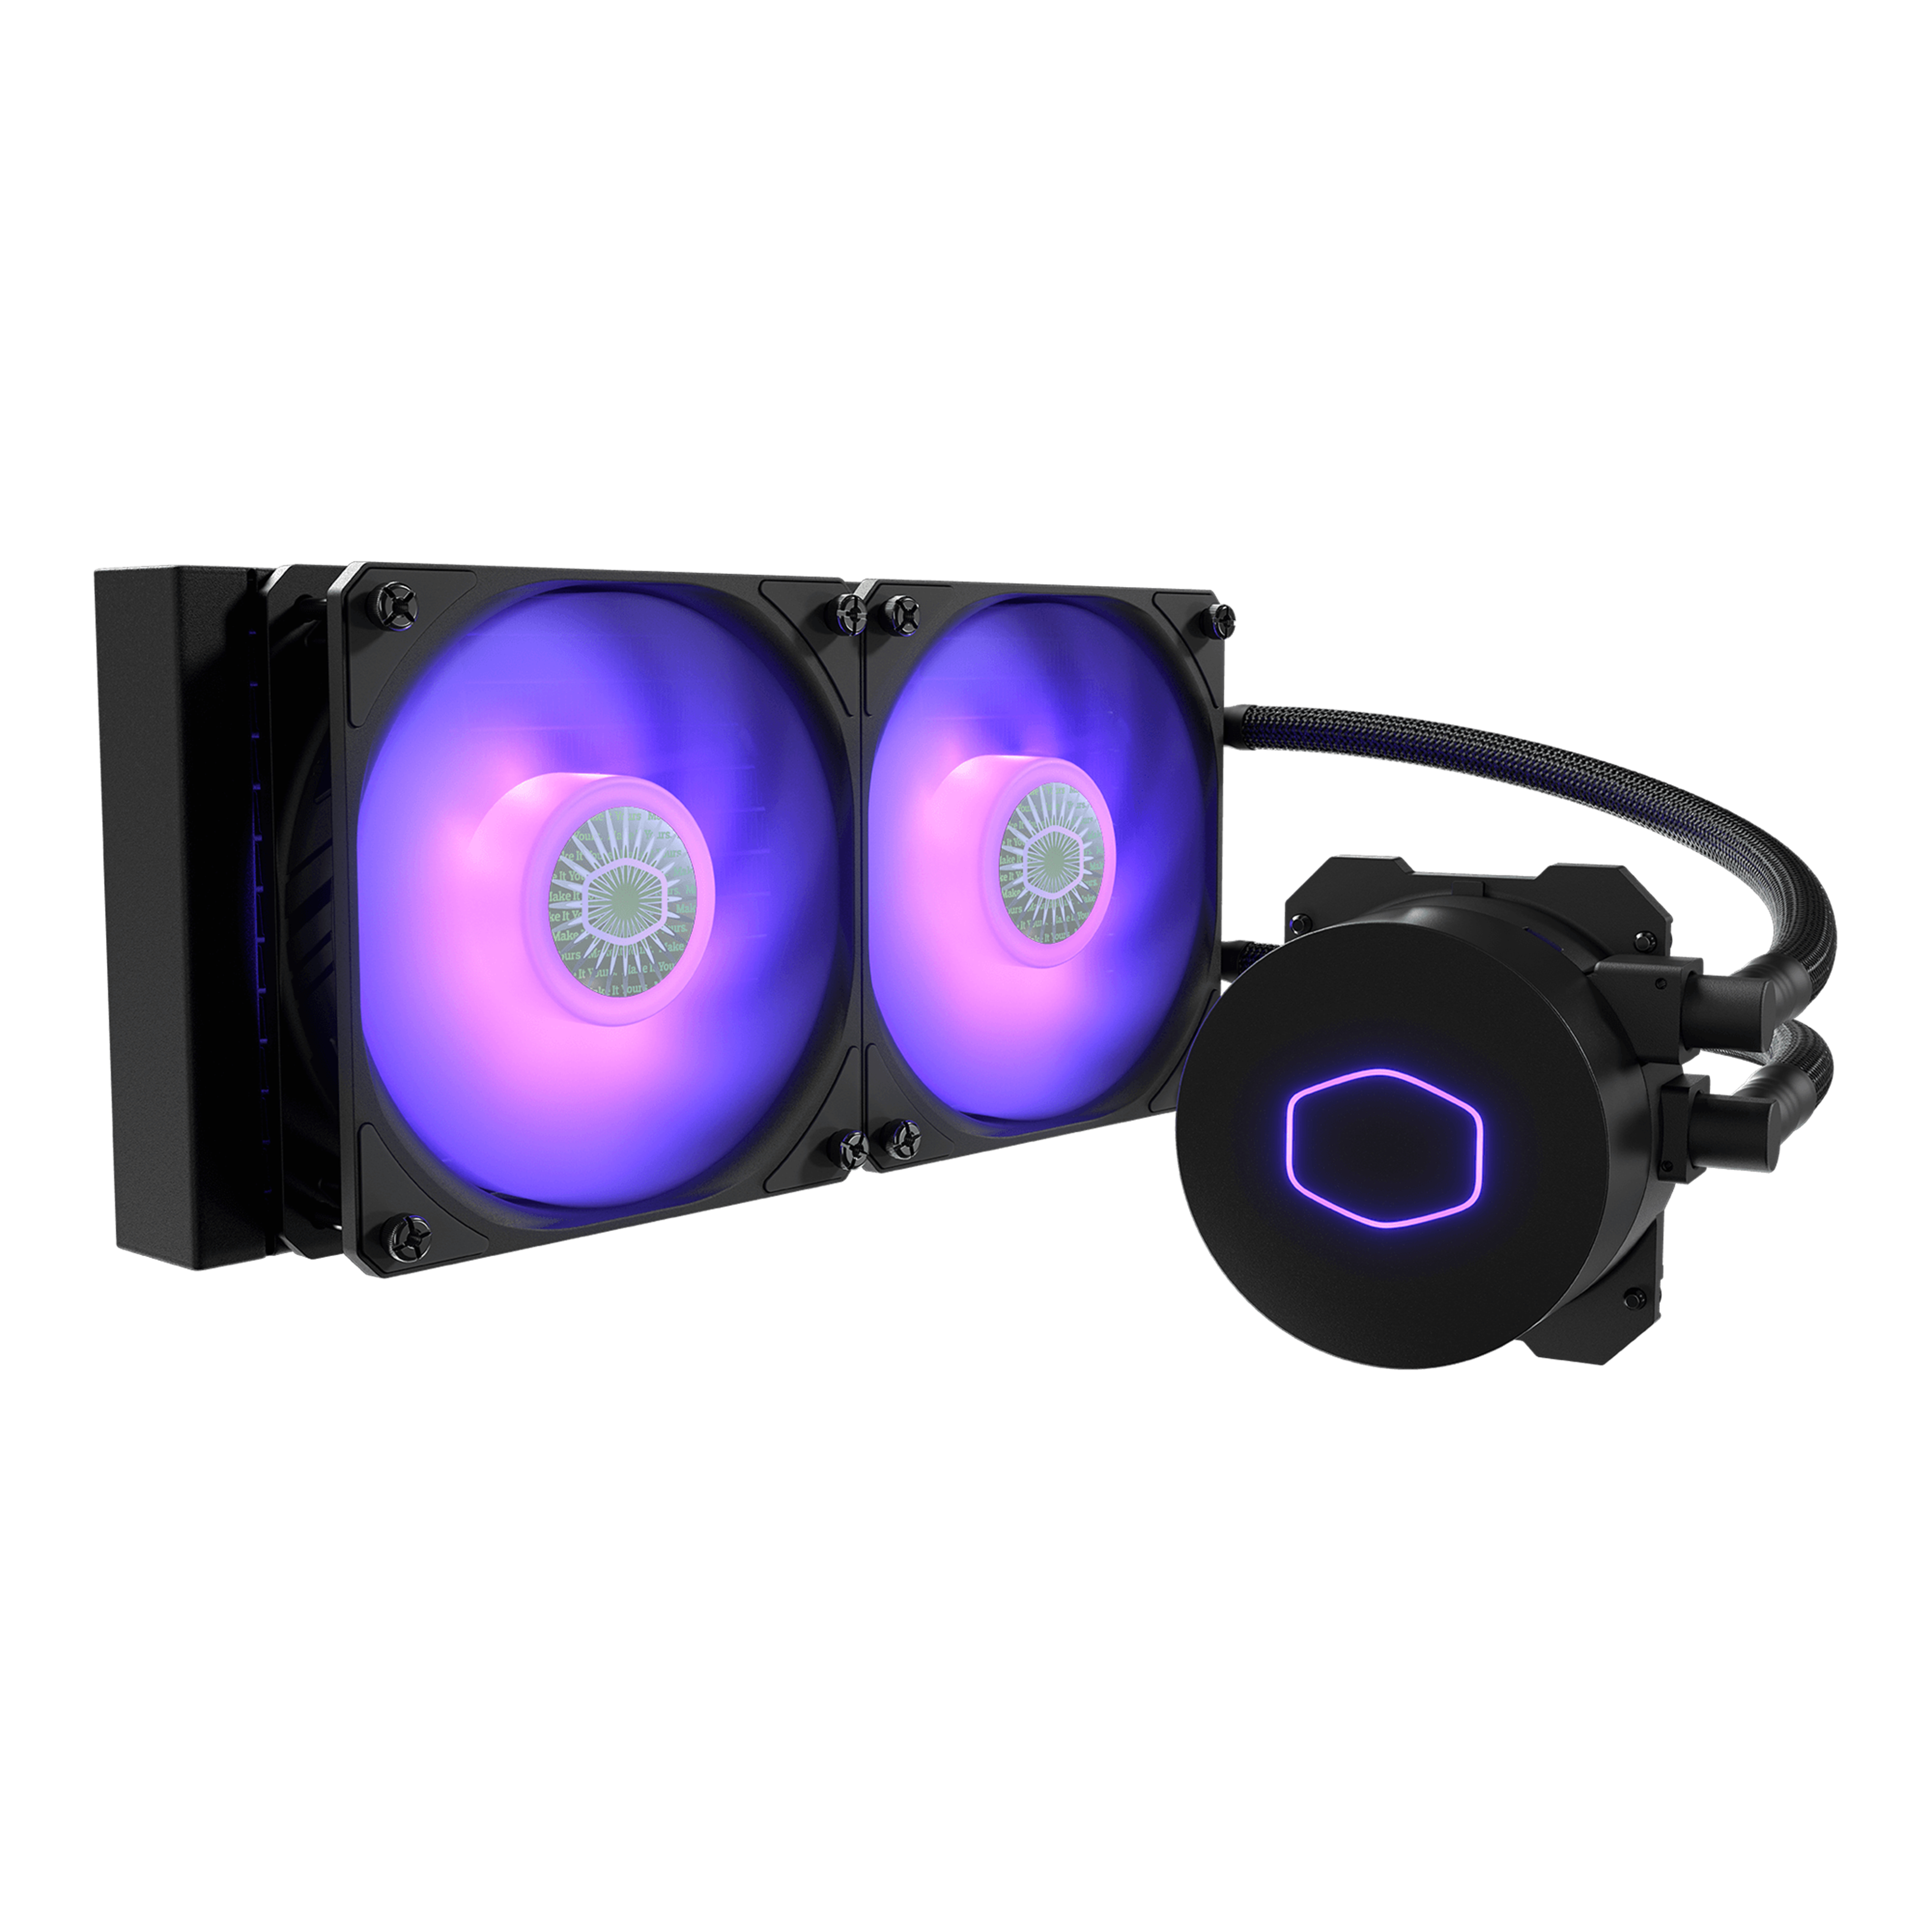 Image of COOLER MASTER DISSIPATORE CPU UNIVERSALE LIQUIDO RGB MLW-D24M-A18PC-R2